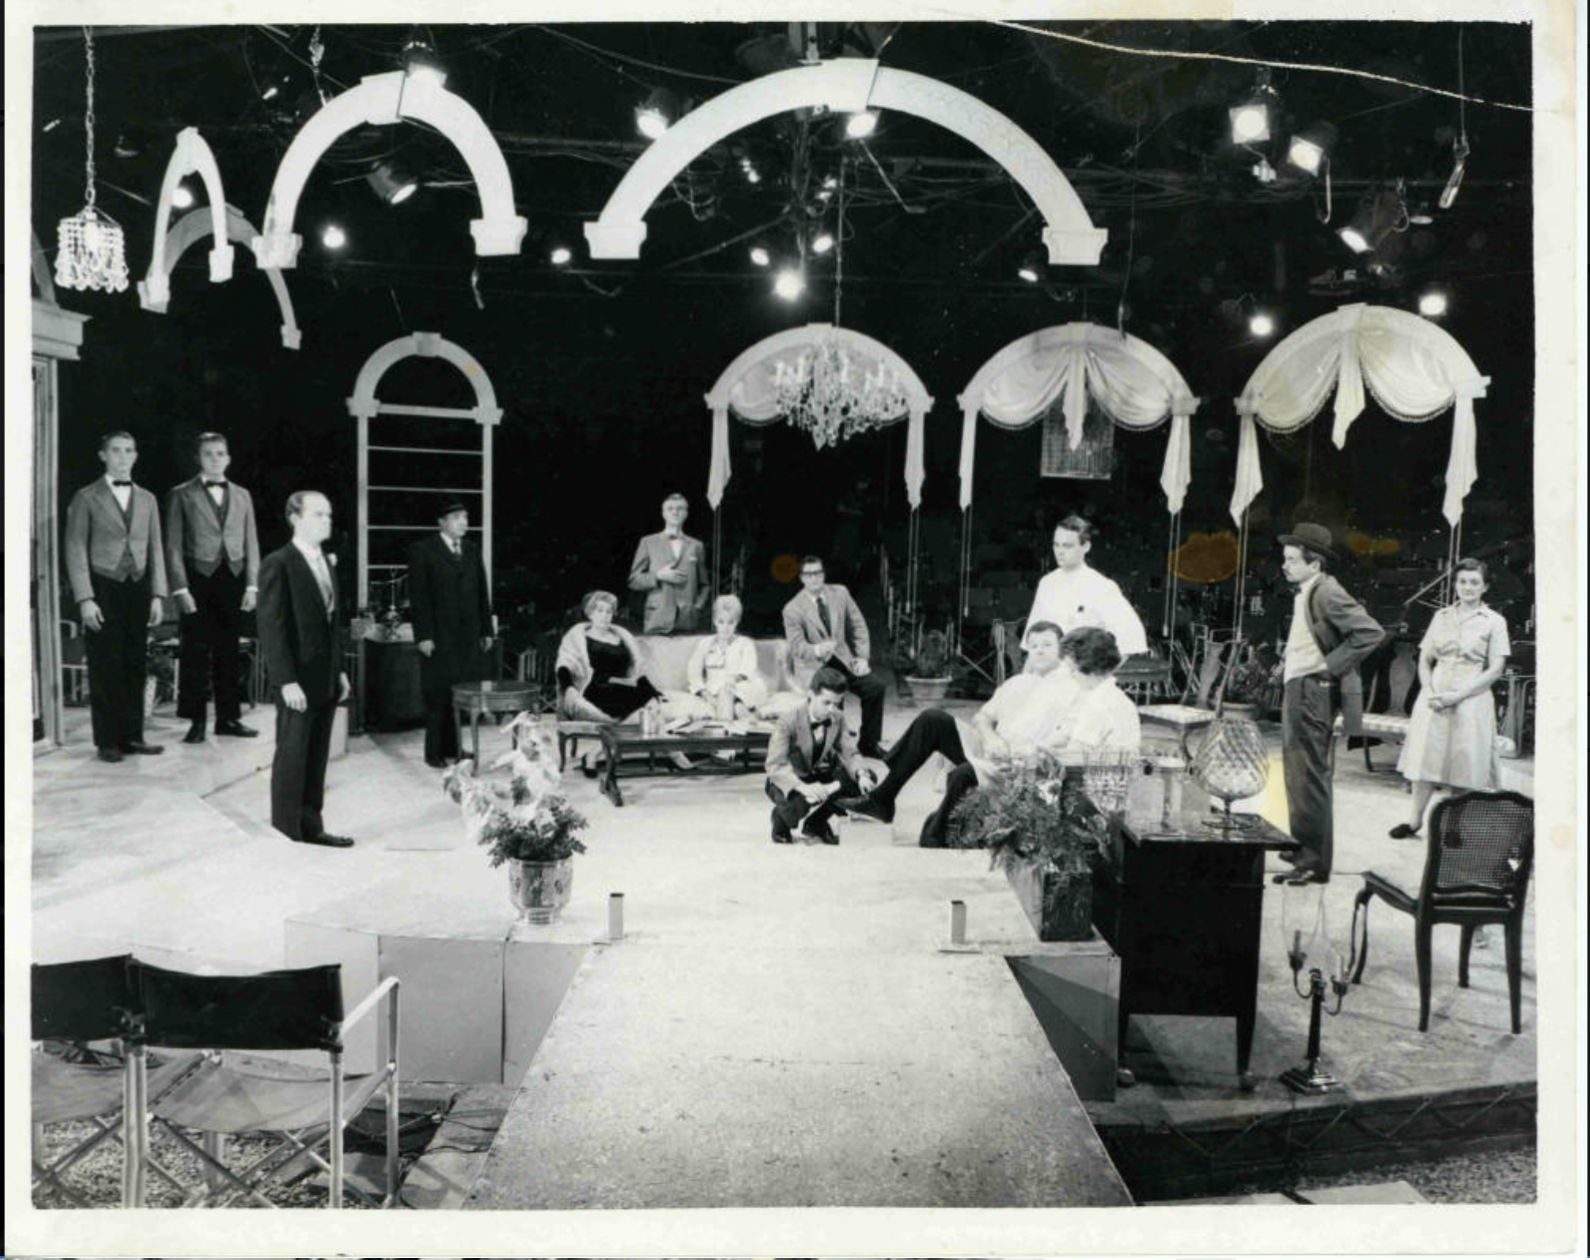 Several people, furniture and props are shown on a stage.